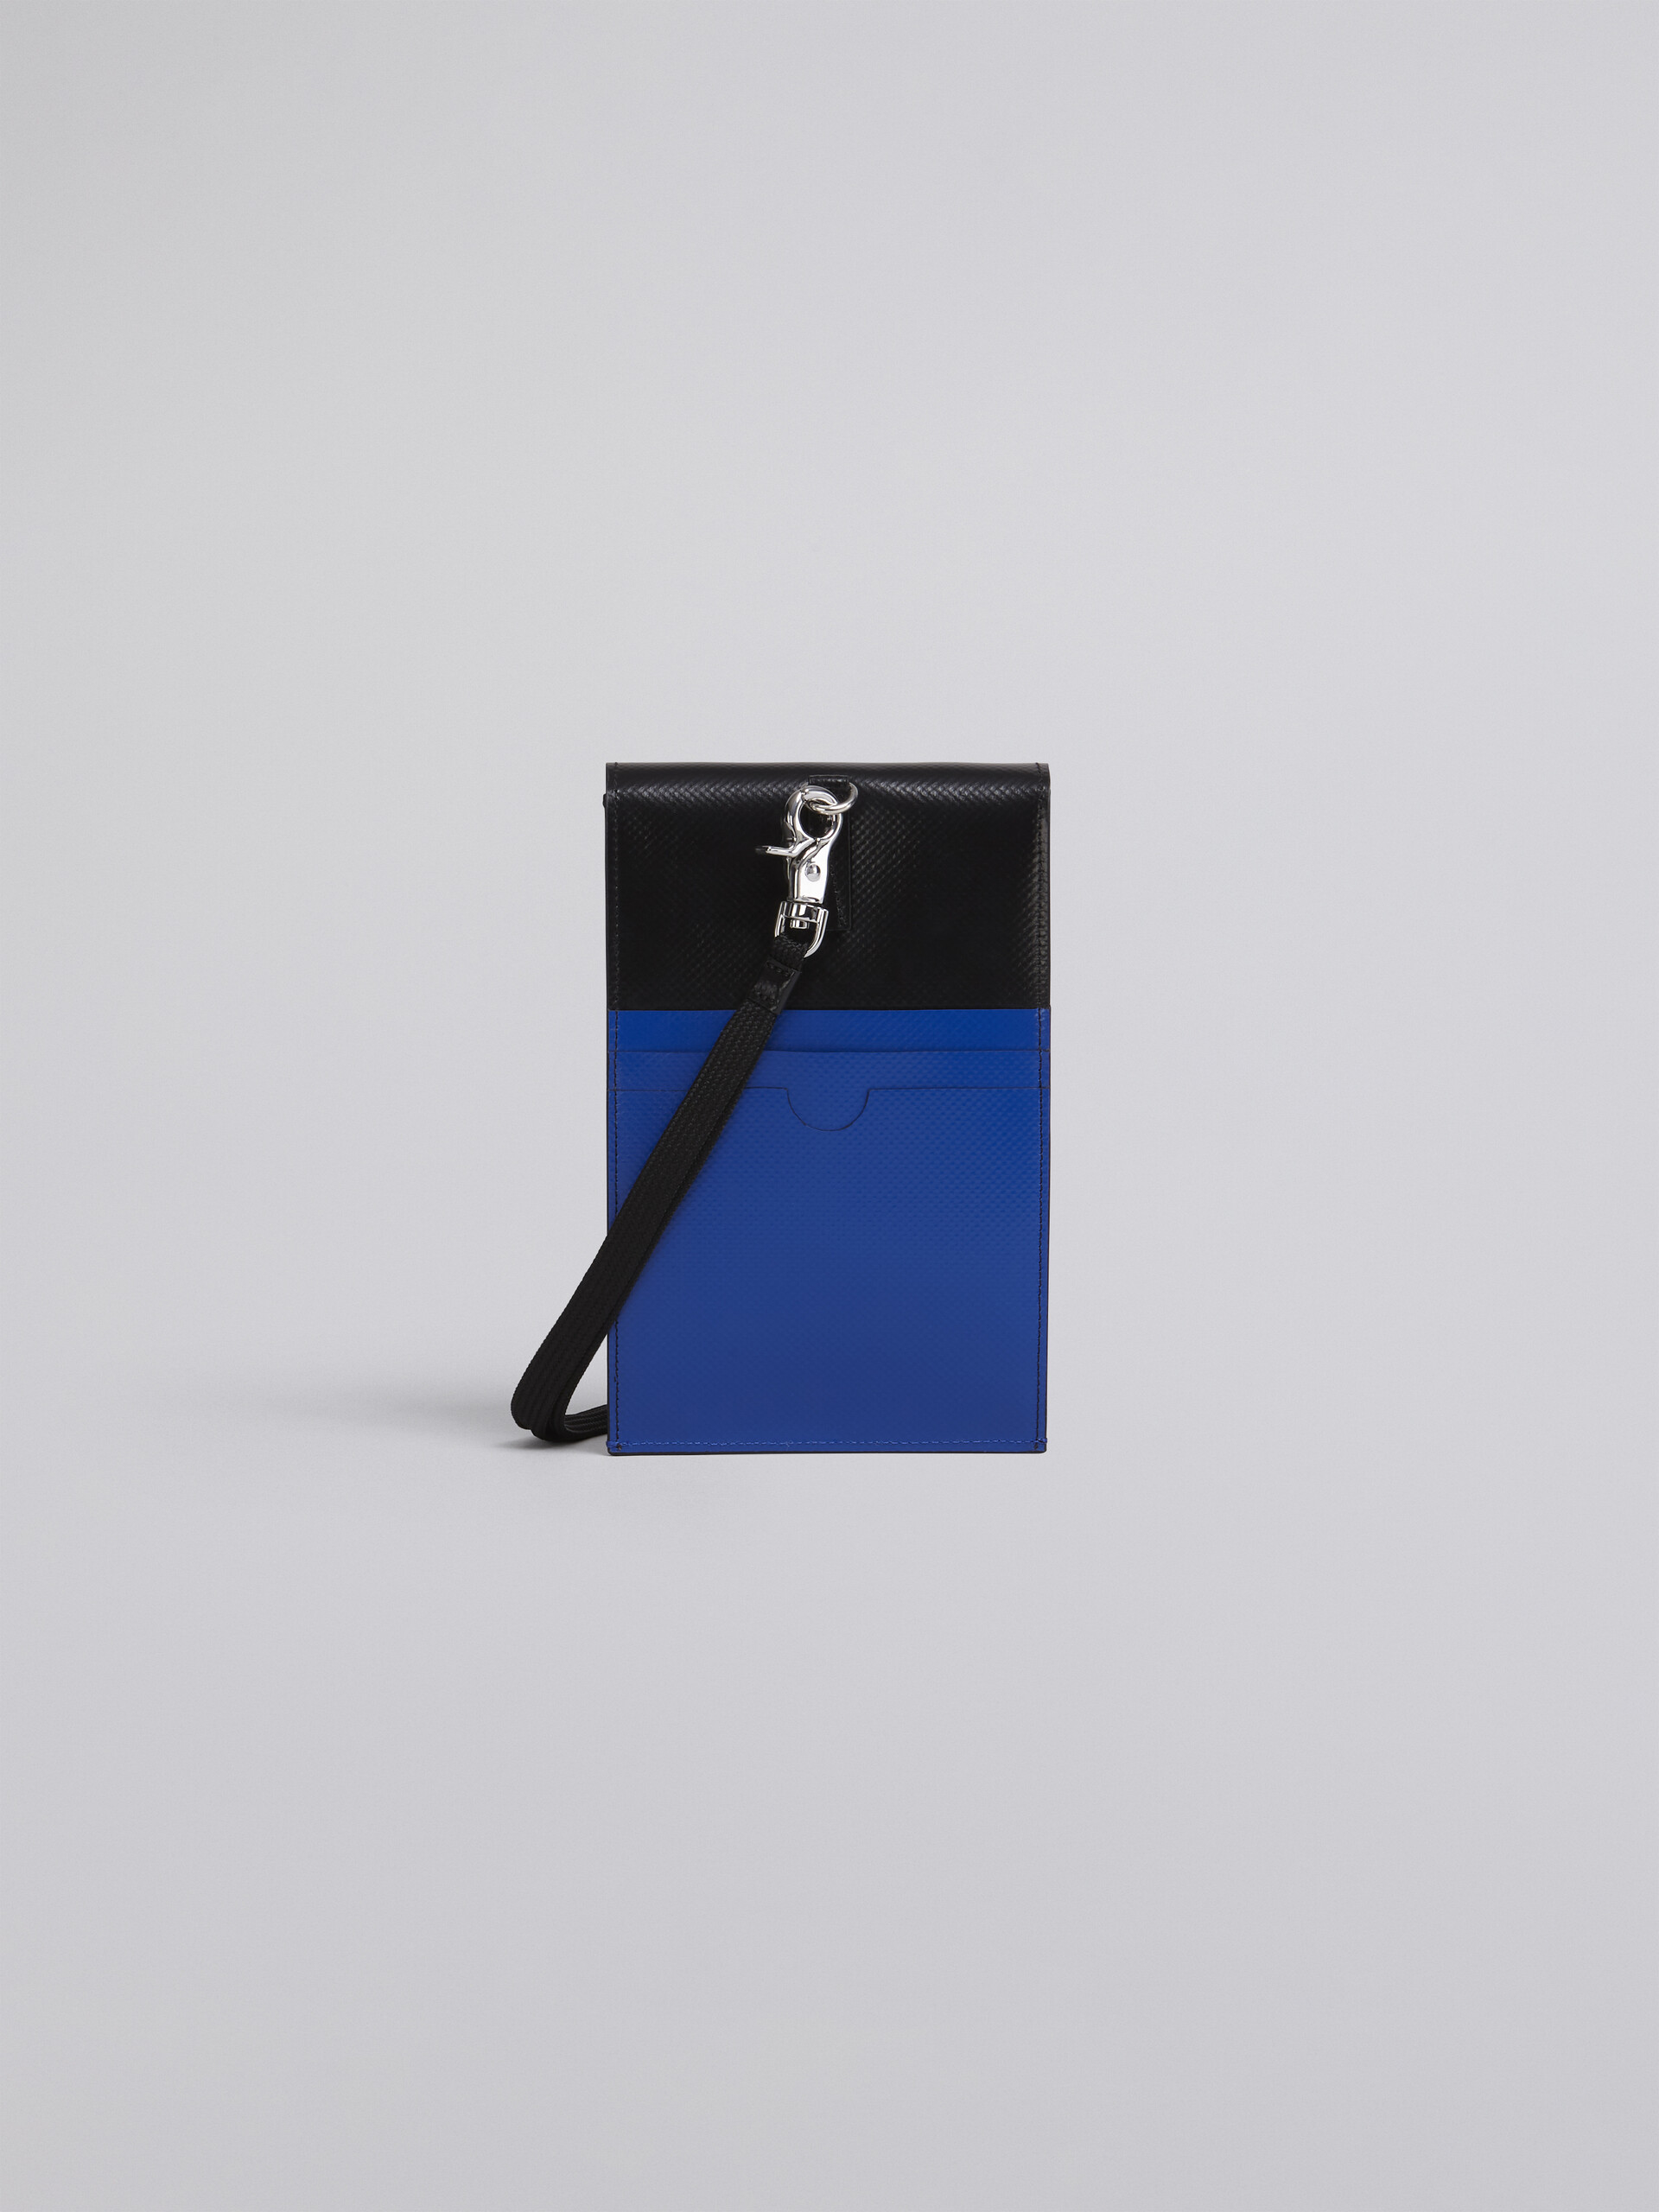 Bi-coloured black and blue PVC mobile case - Wallets and Small Leather Goods - Image 2